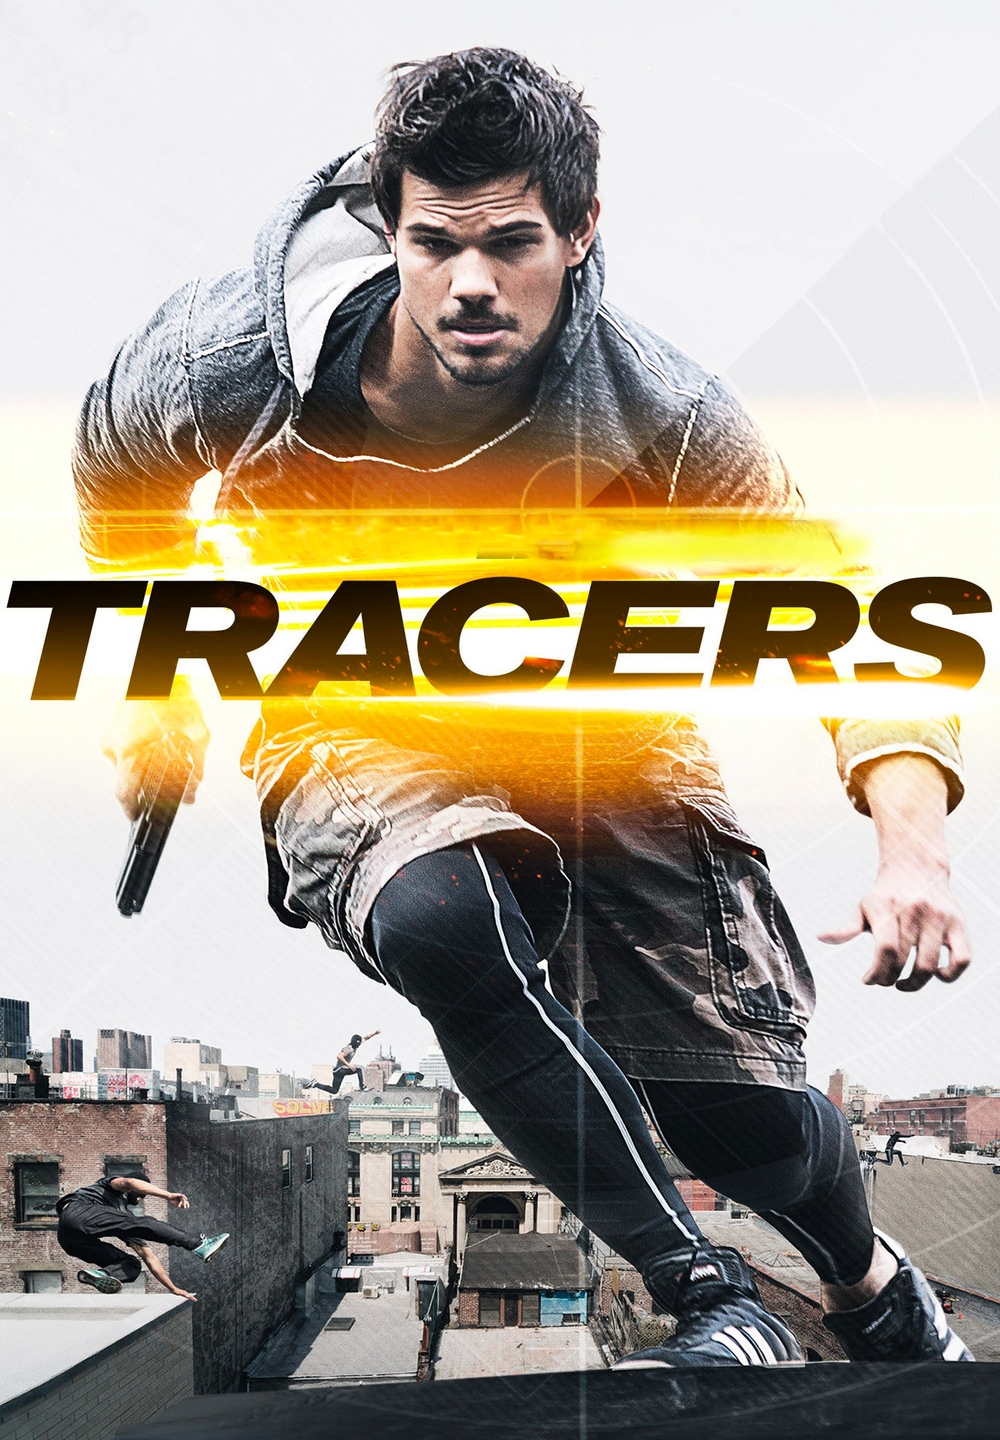 Tracers [HD] (2015)